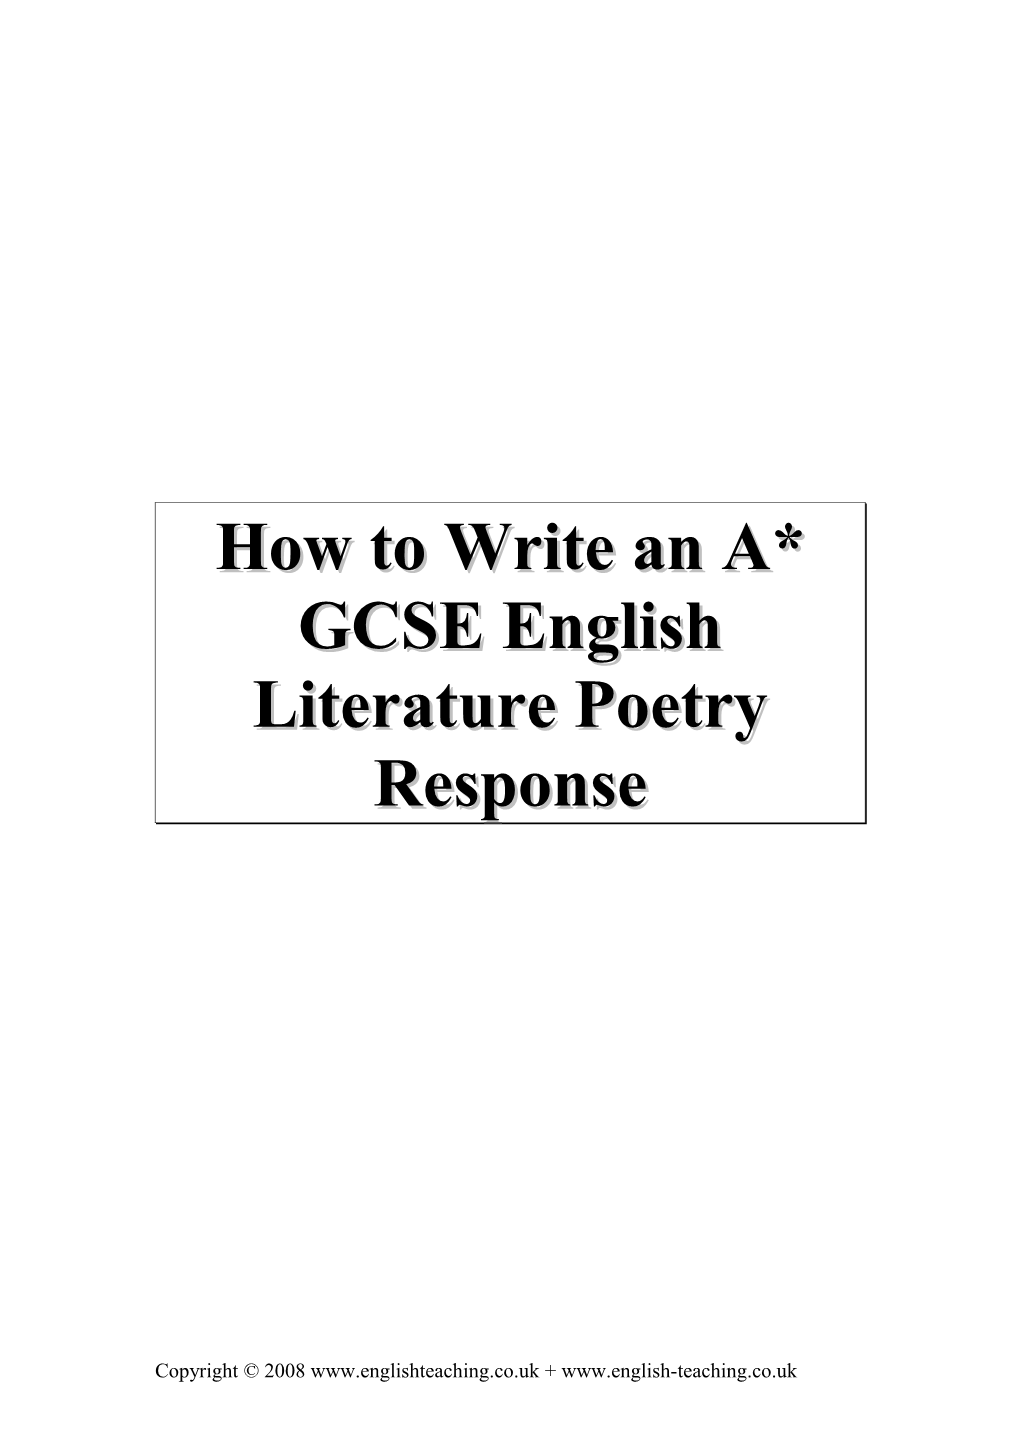 How to Write an A* GCSE English Literature Poetry Response